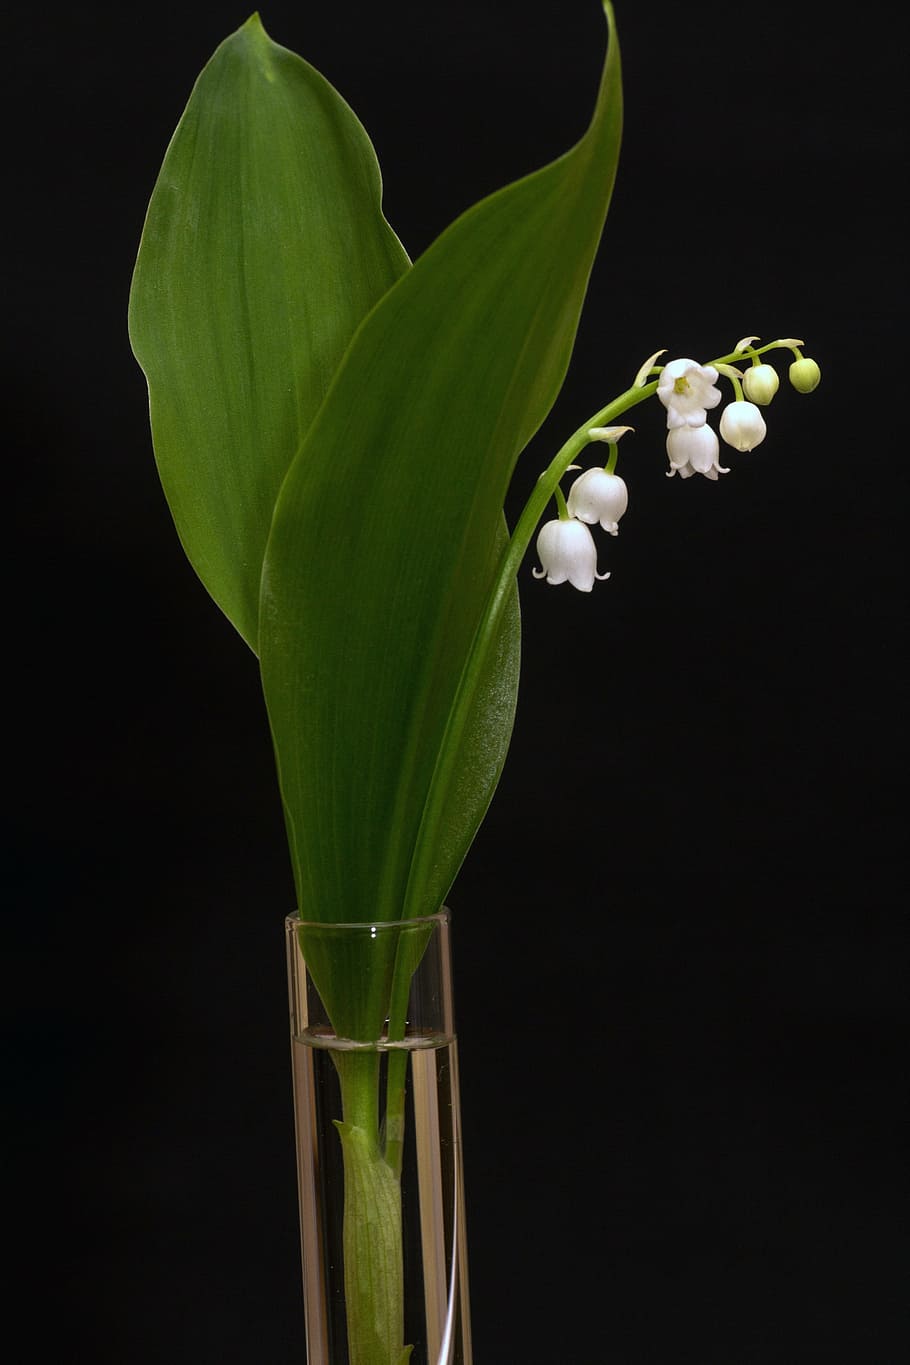 green, leaf plant, vase, lily of the valley, convallaria majalis, spring, white, bell, flower, nature